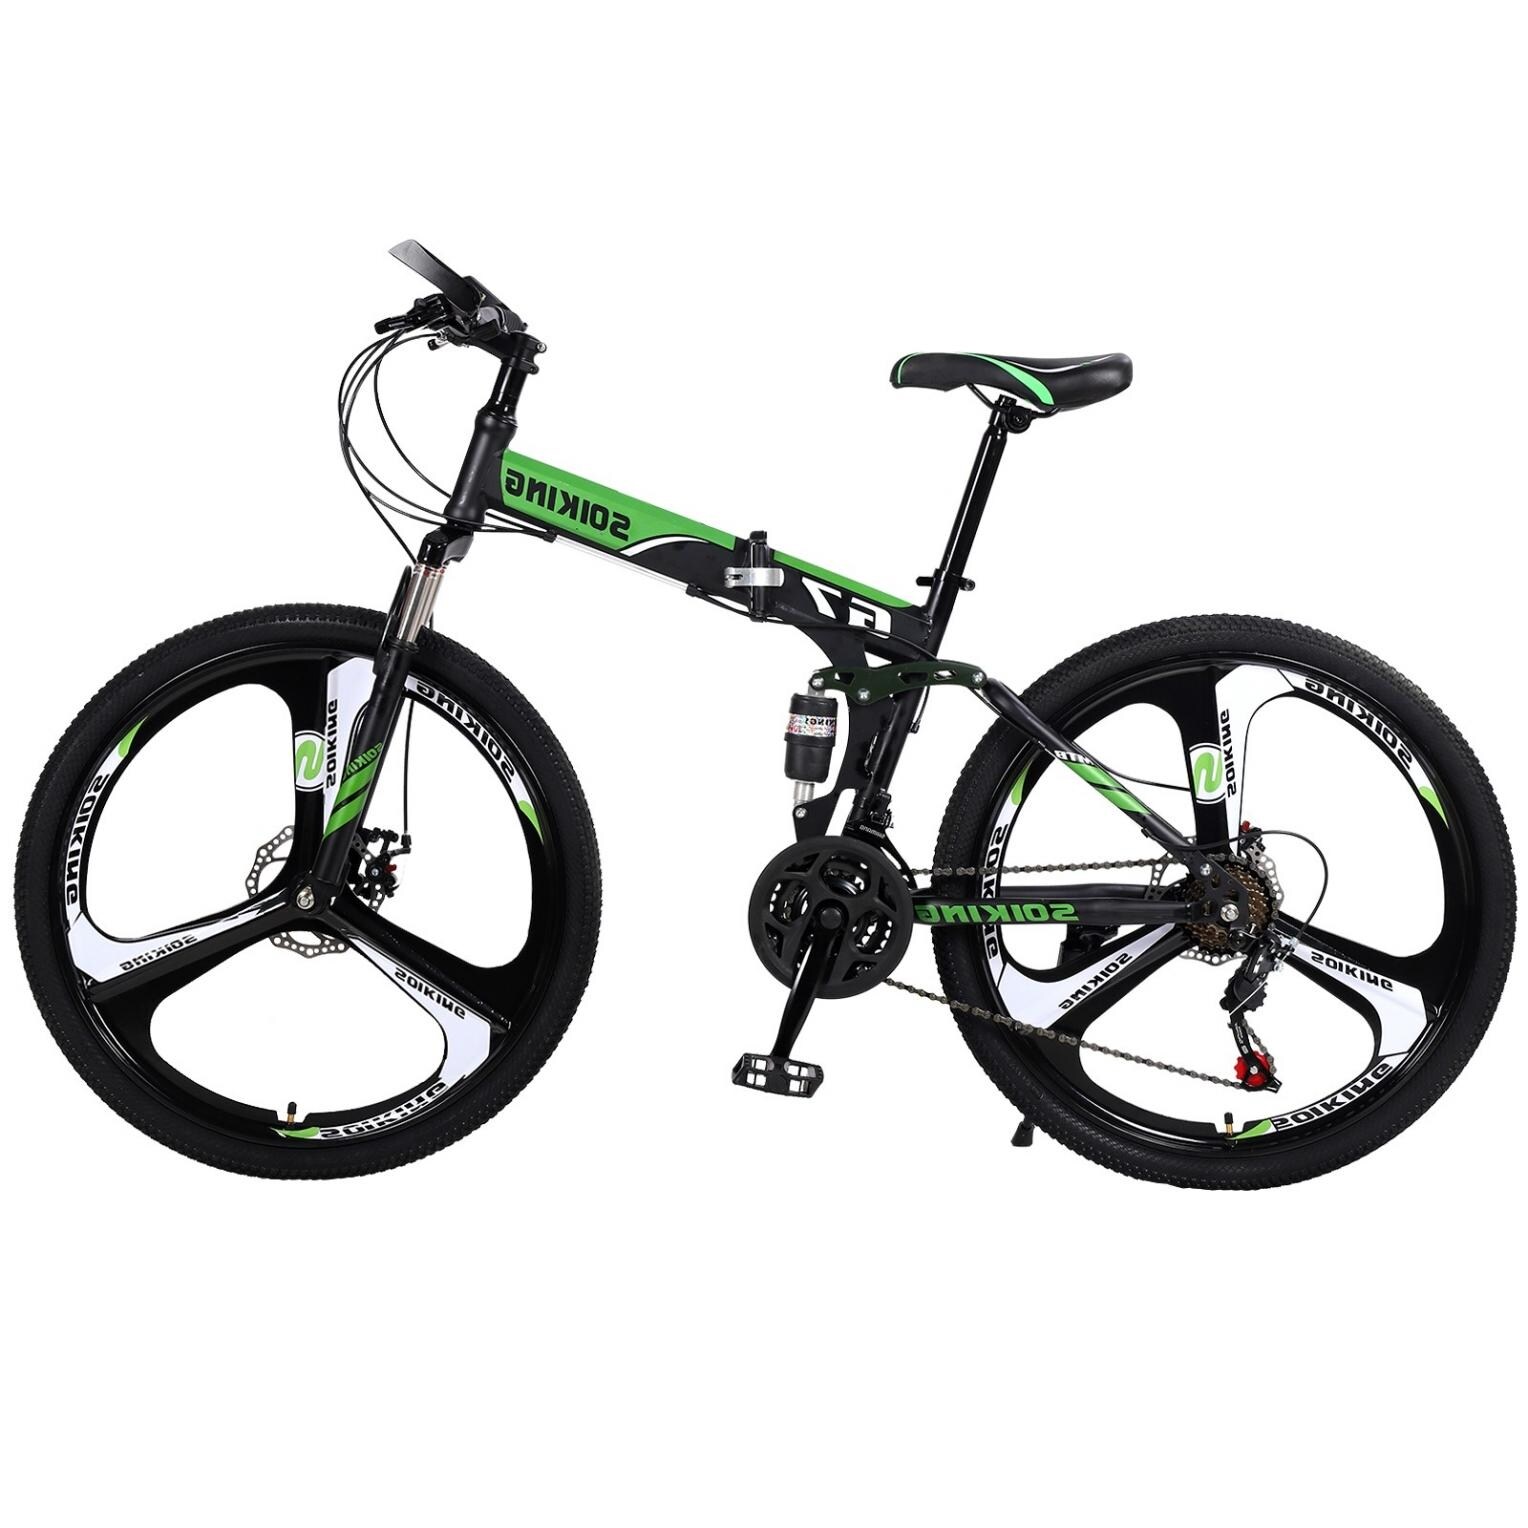 Double Disc Brake Bicycle Gear Steel Frame Adult Travel Folding Bicycle US Fast Shipment 20 Inch Variable Speed Bicycle Gecau Folding Mountain Bike 21 Speed 5 Spoke 